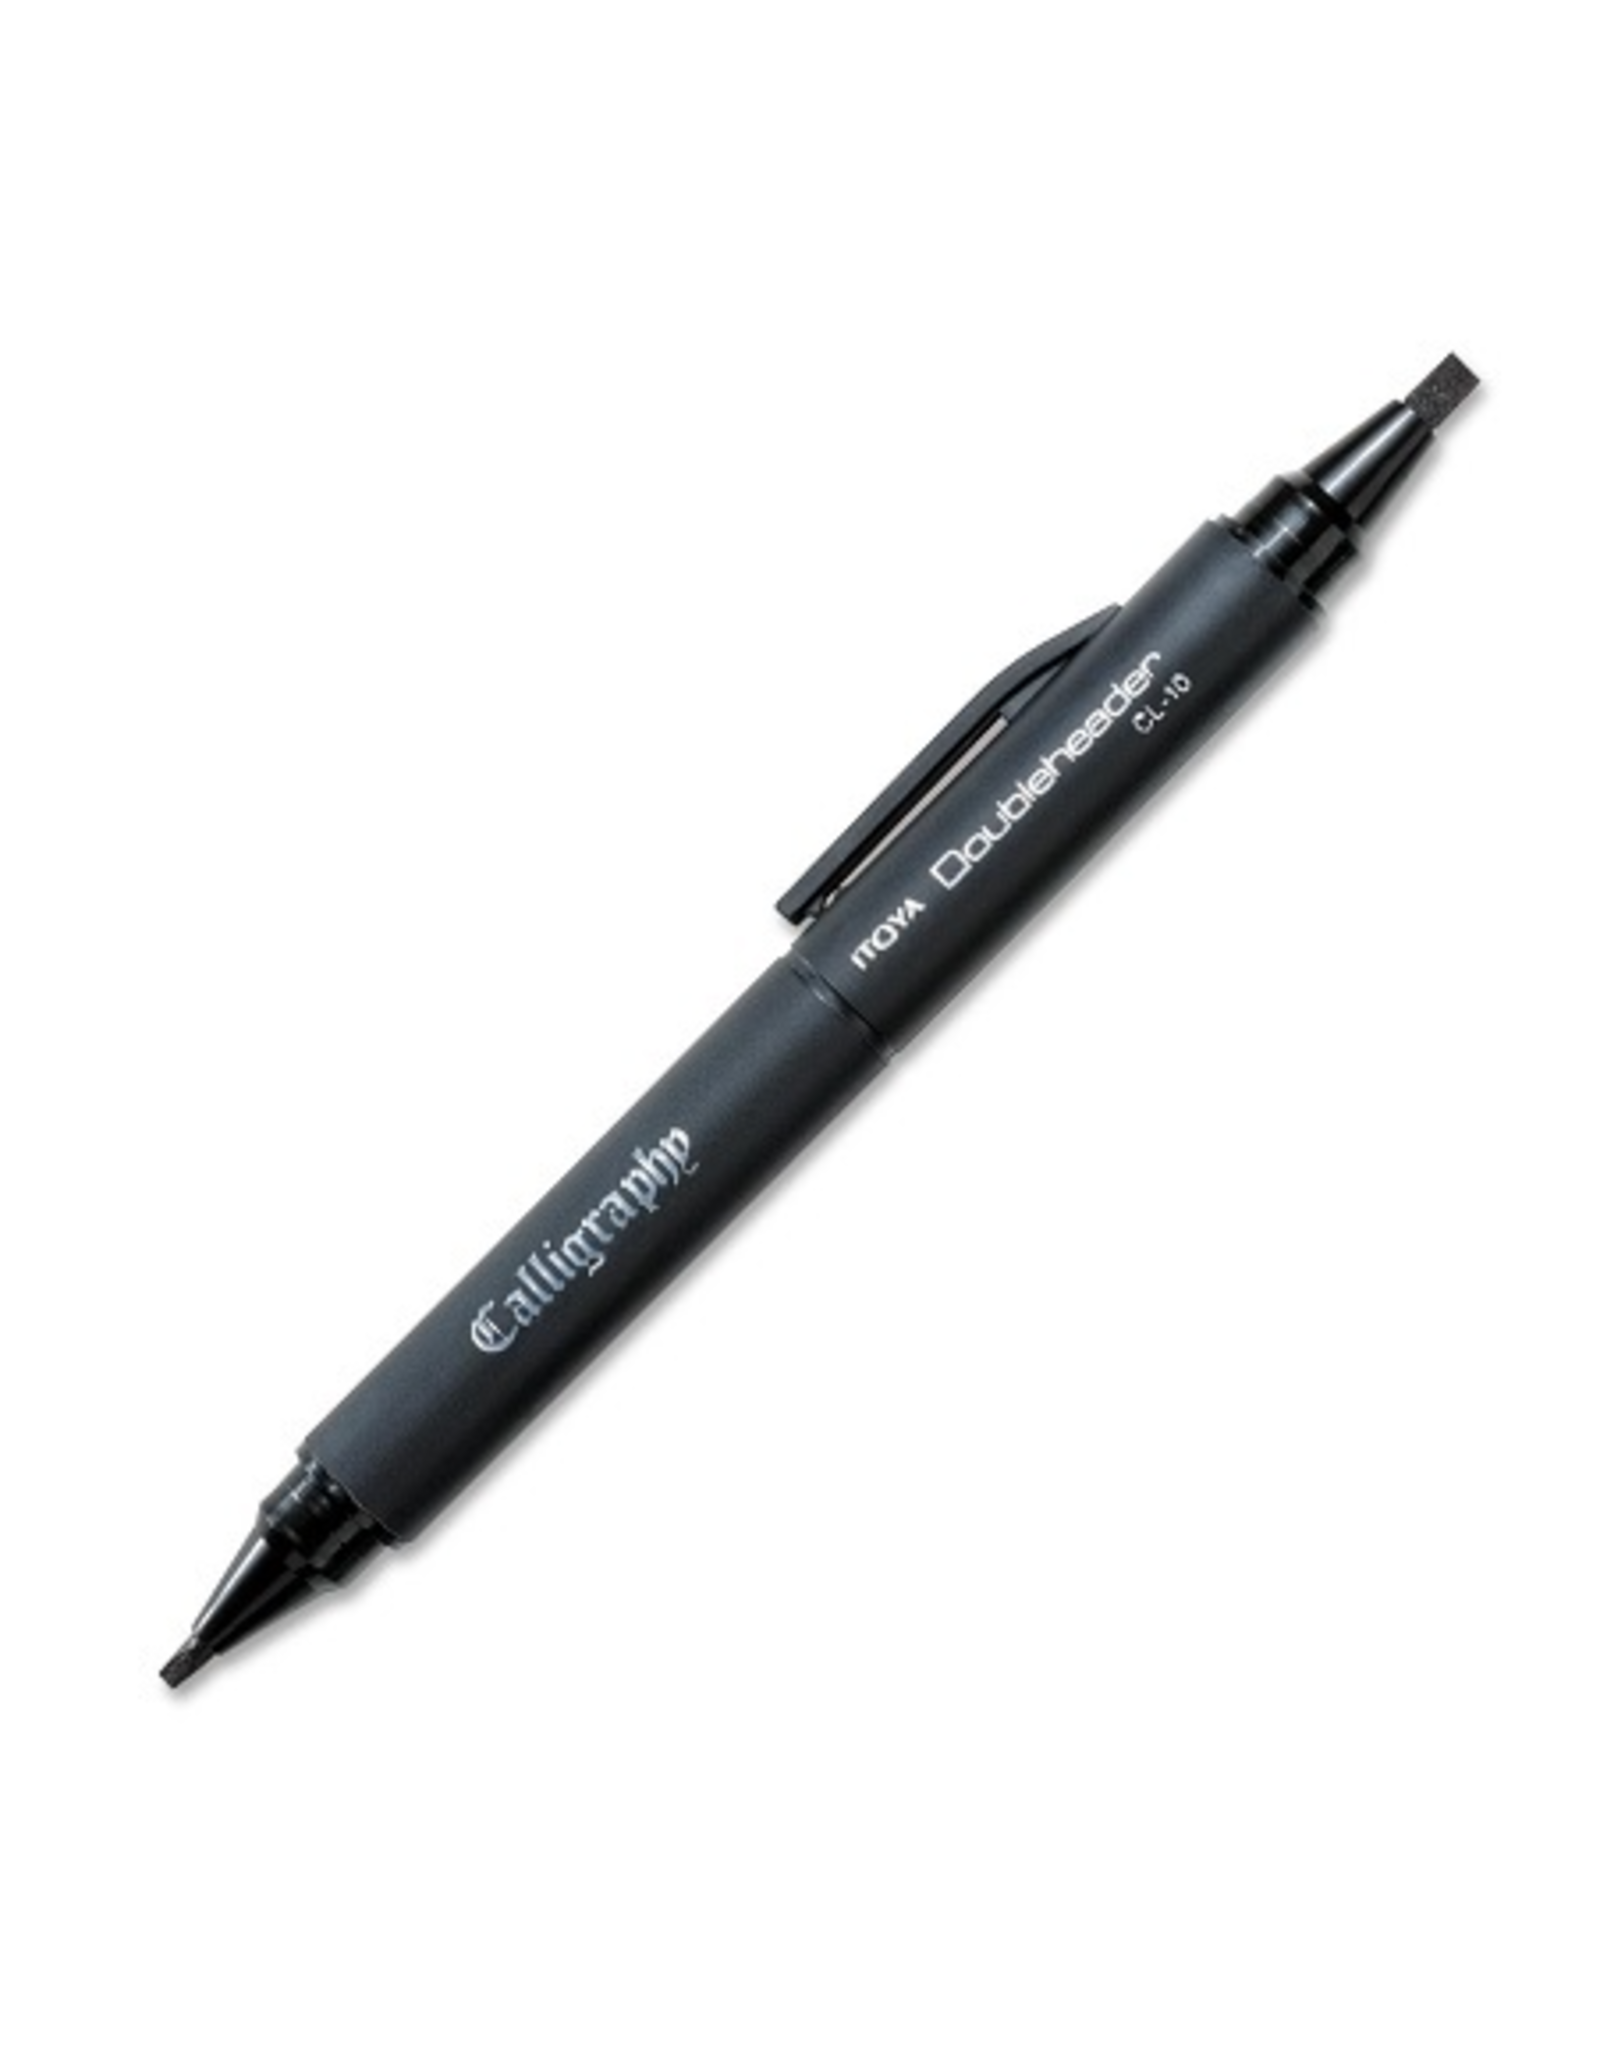 Itoya CALLIGRAPHY MARKER DOUBLE ENDED, BLACK